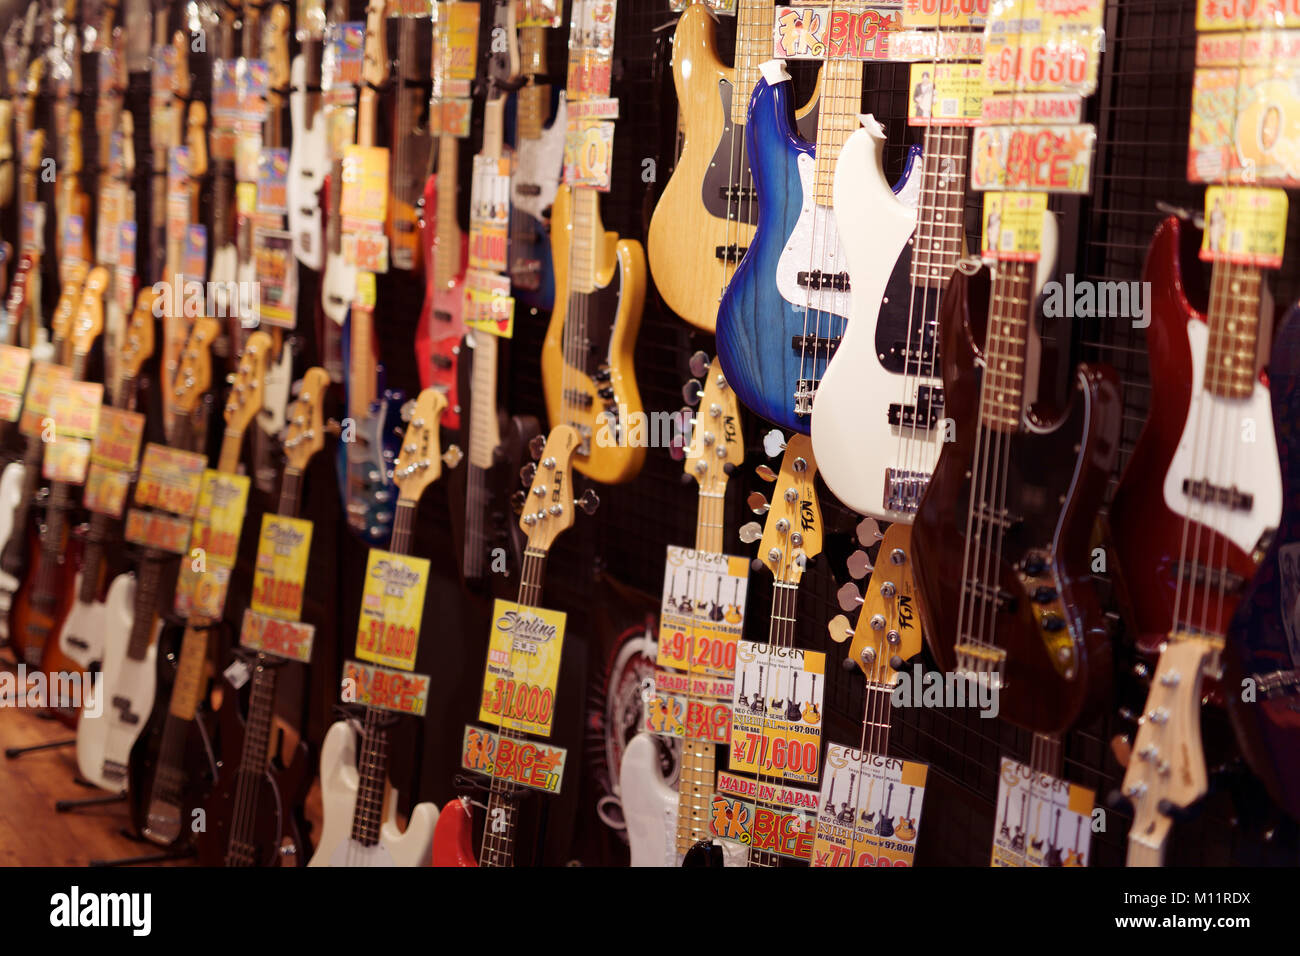 Electric guitars and bass guitars on display in a music instrument store in Kyoto, Japan 2017 Stock Photo